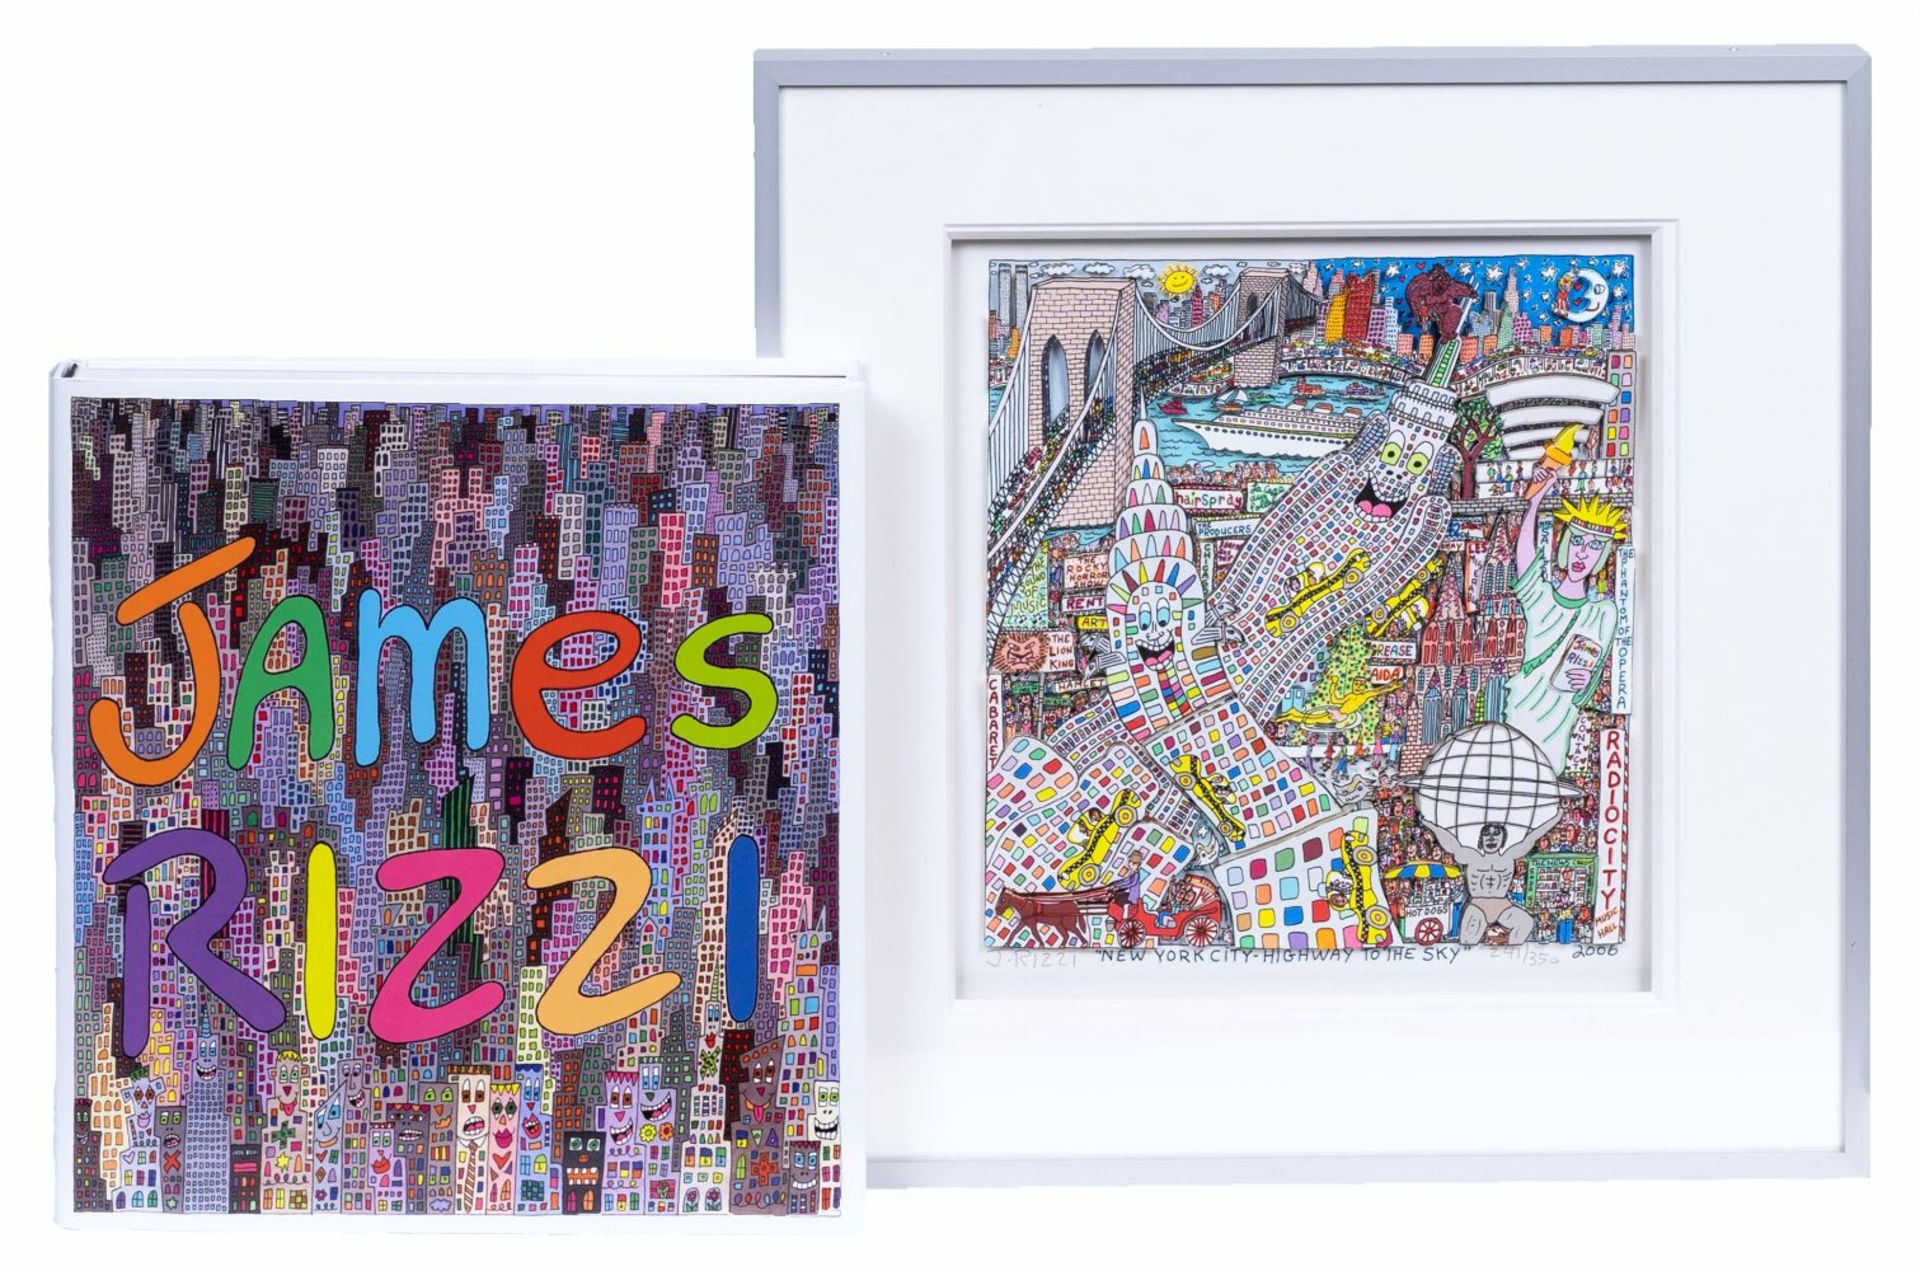 James Rizzi (New York 1950 - New York 2011). Highway to the Sky.